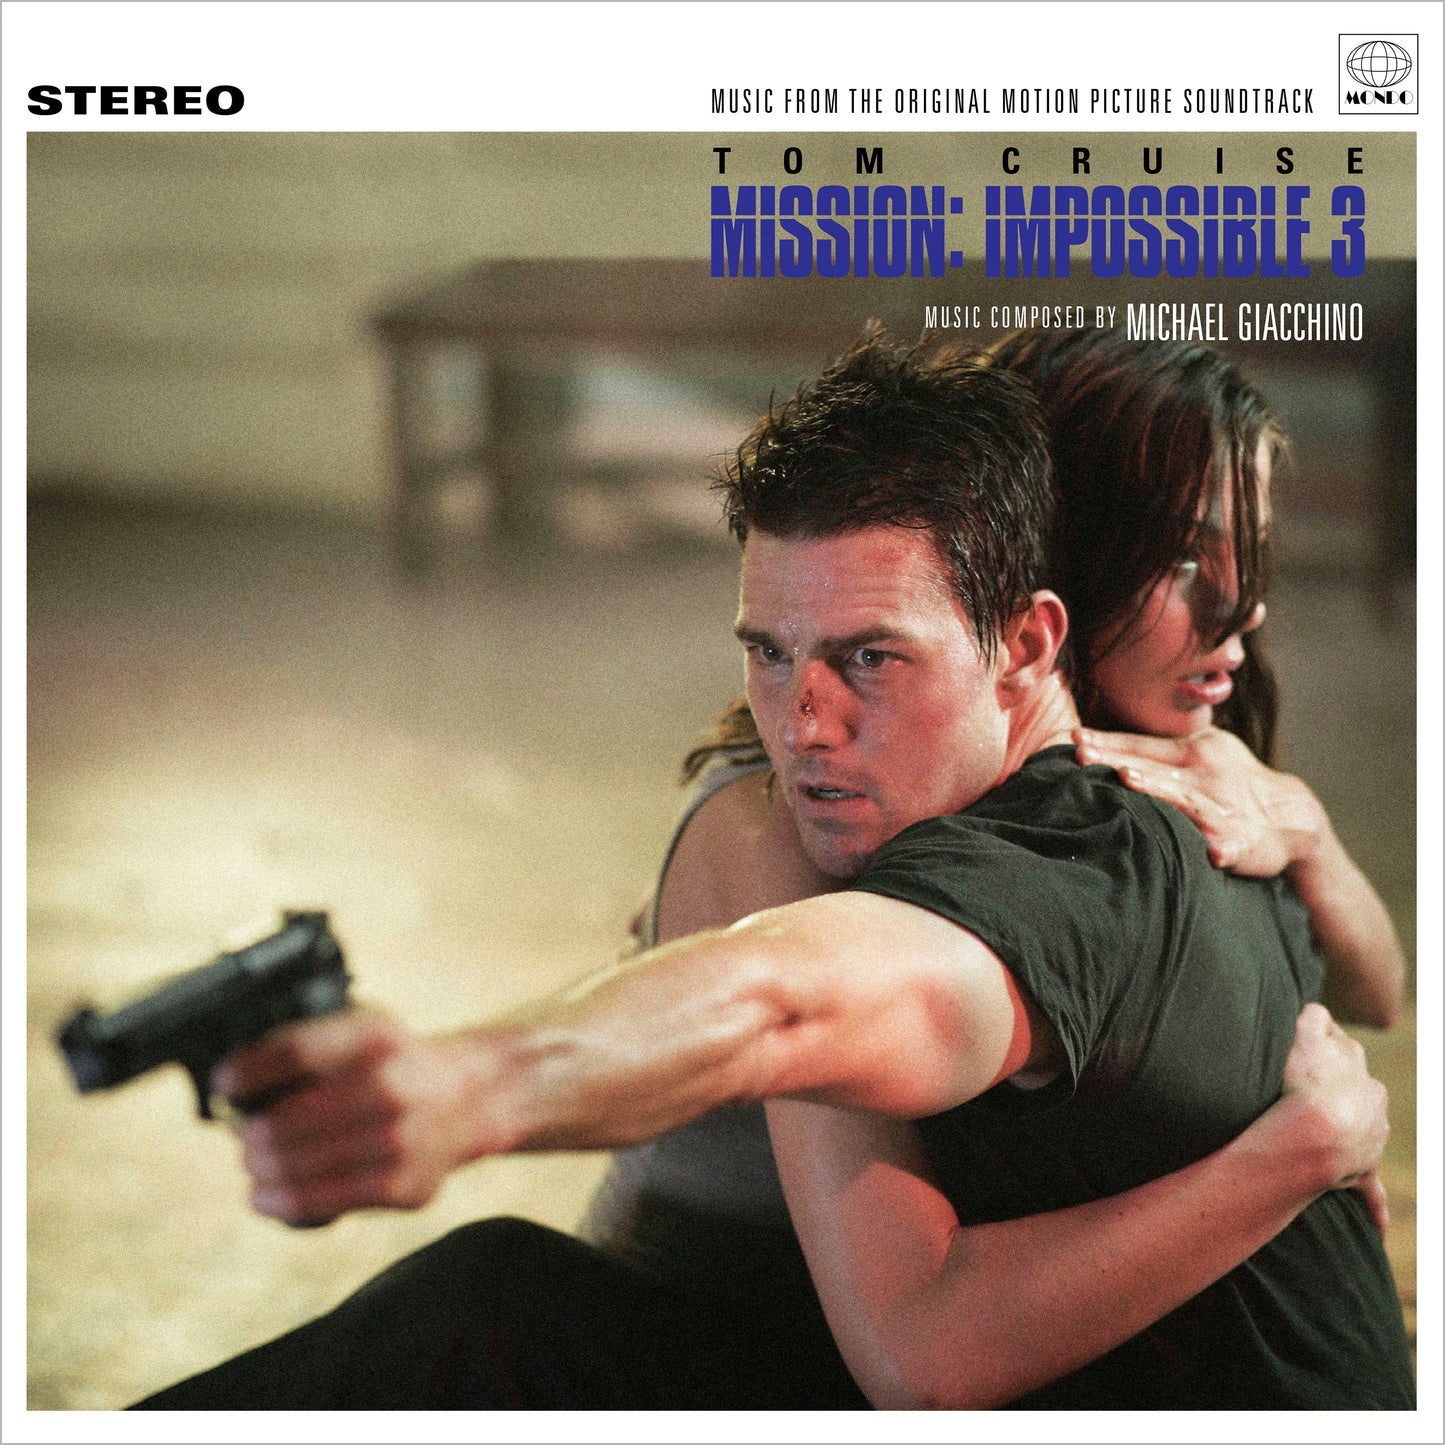 MOND-153 - Michael Giacchino - Mission: Impossible 3 - Music from the Motion Picture